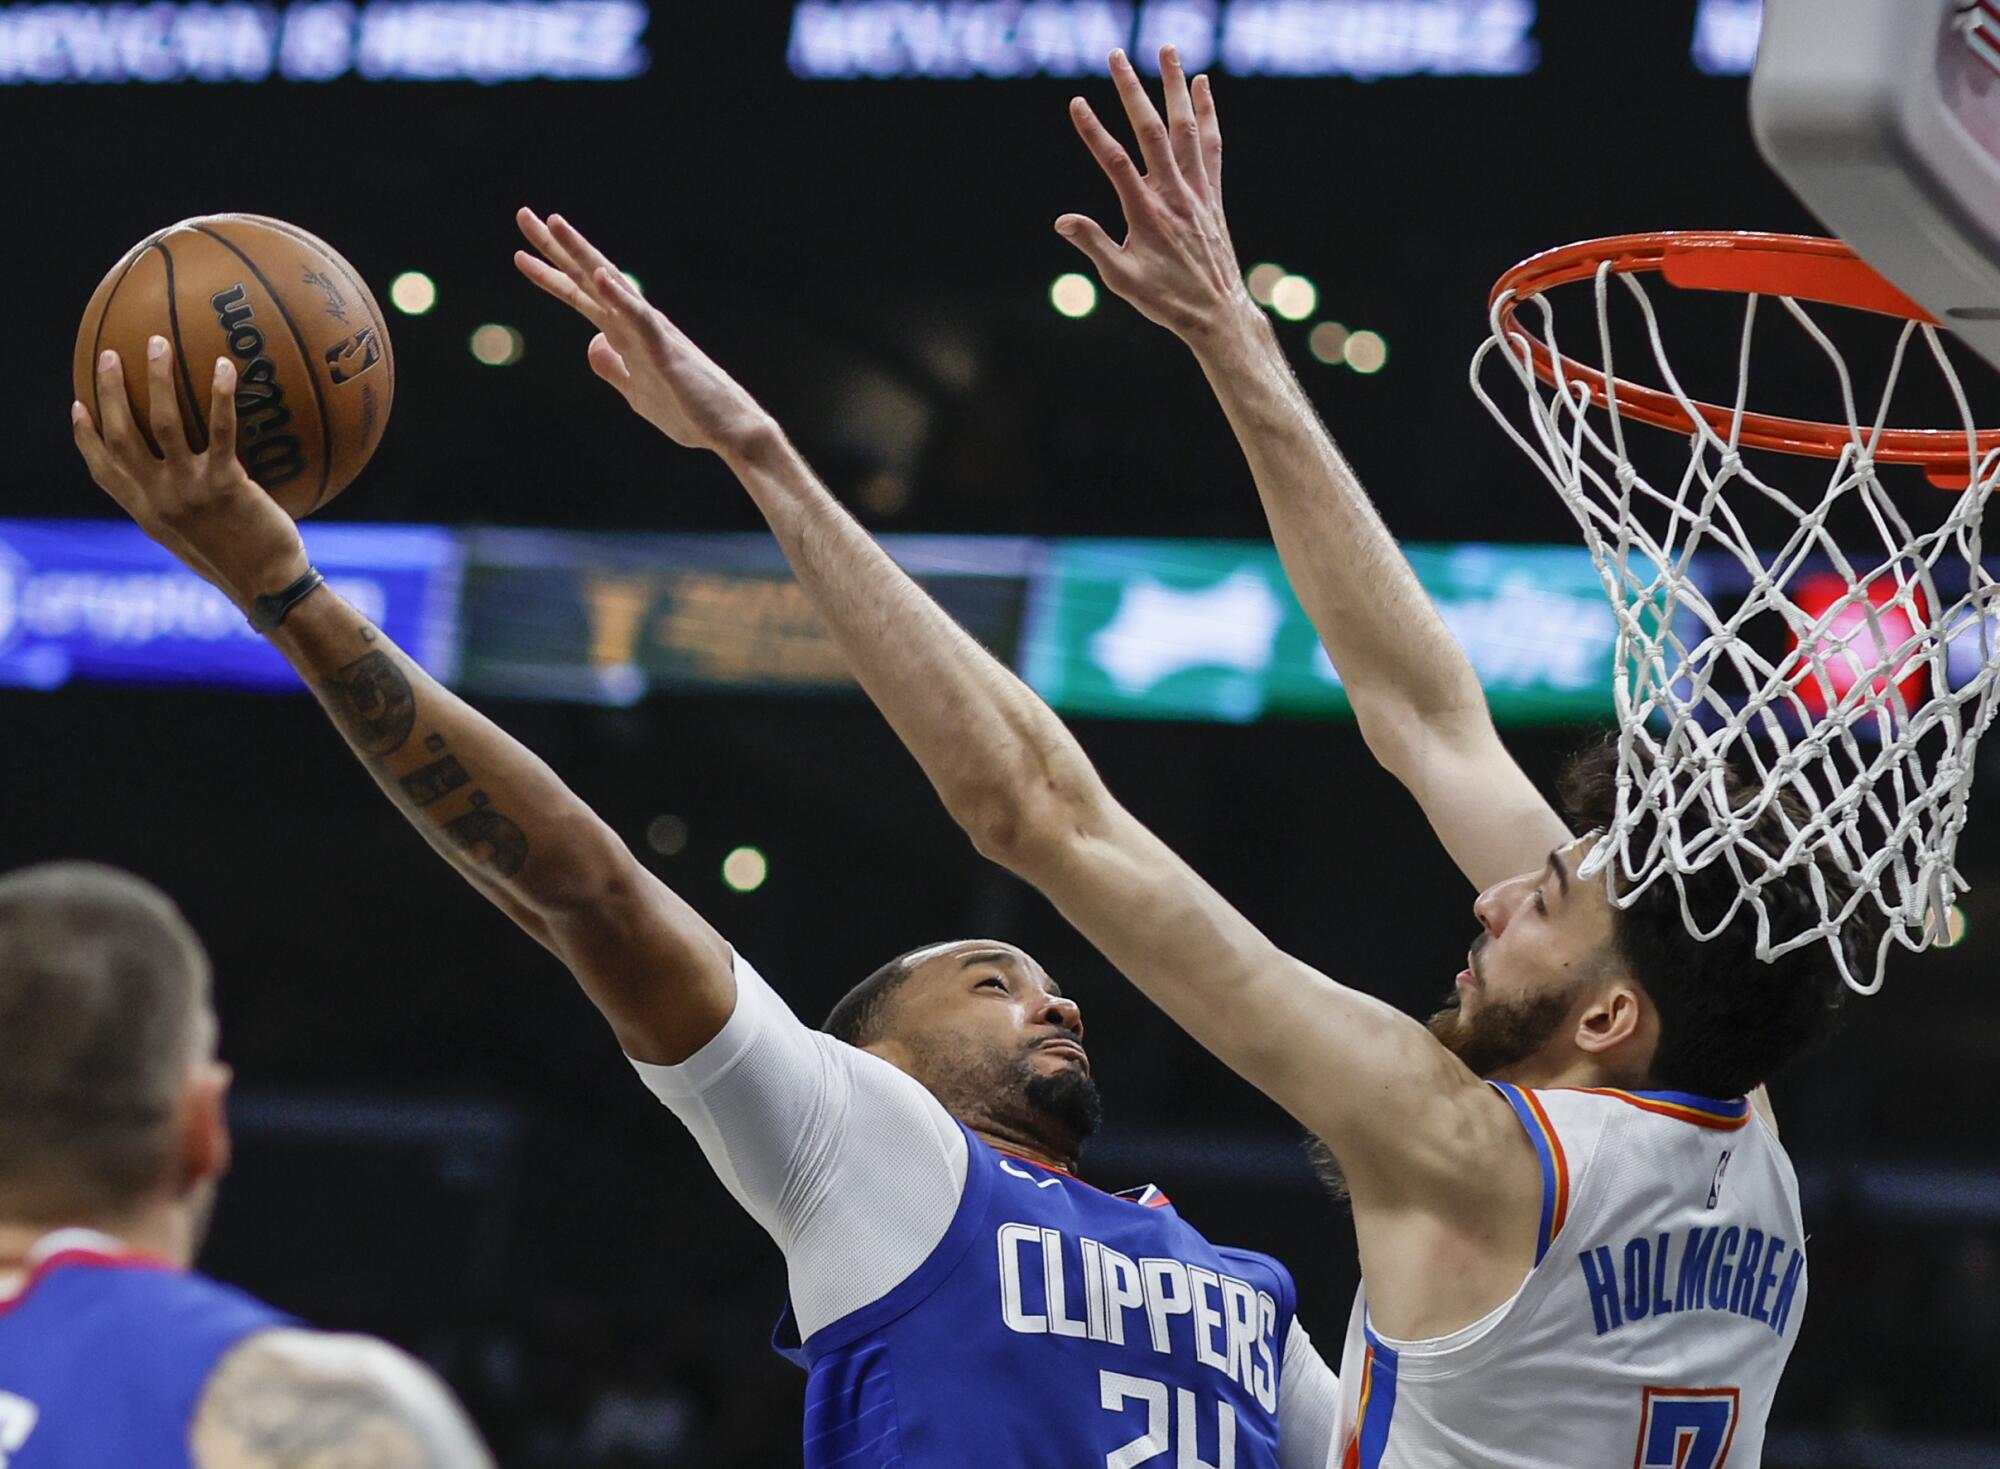 Clippers guard Norman Powell, right, tries to score on a layup past Thunder forward Chet Holmgren.